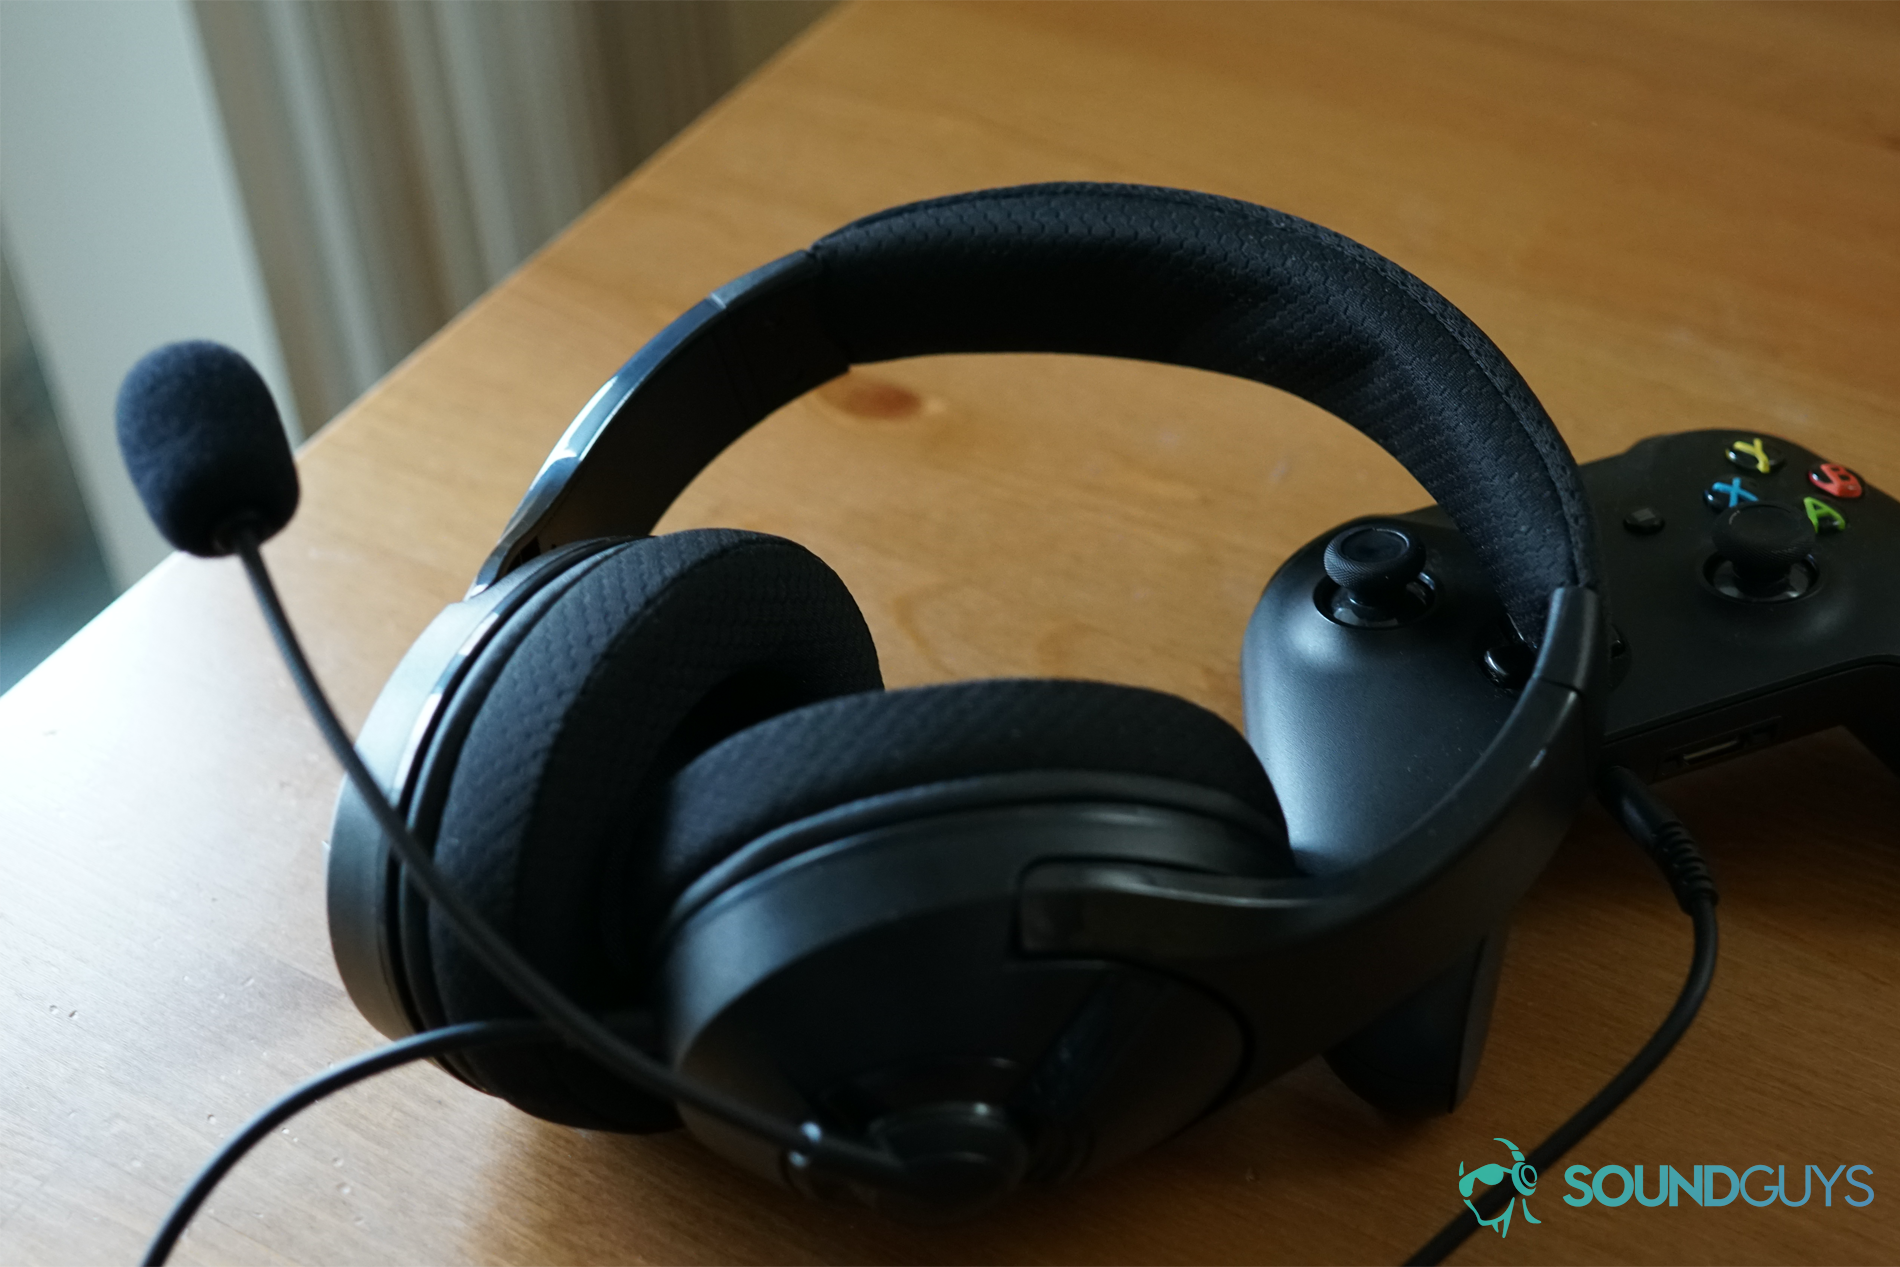 The AmazonBasics Gaming headset leaning on and plugged into an Xbox One controller on a wooden table.